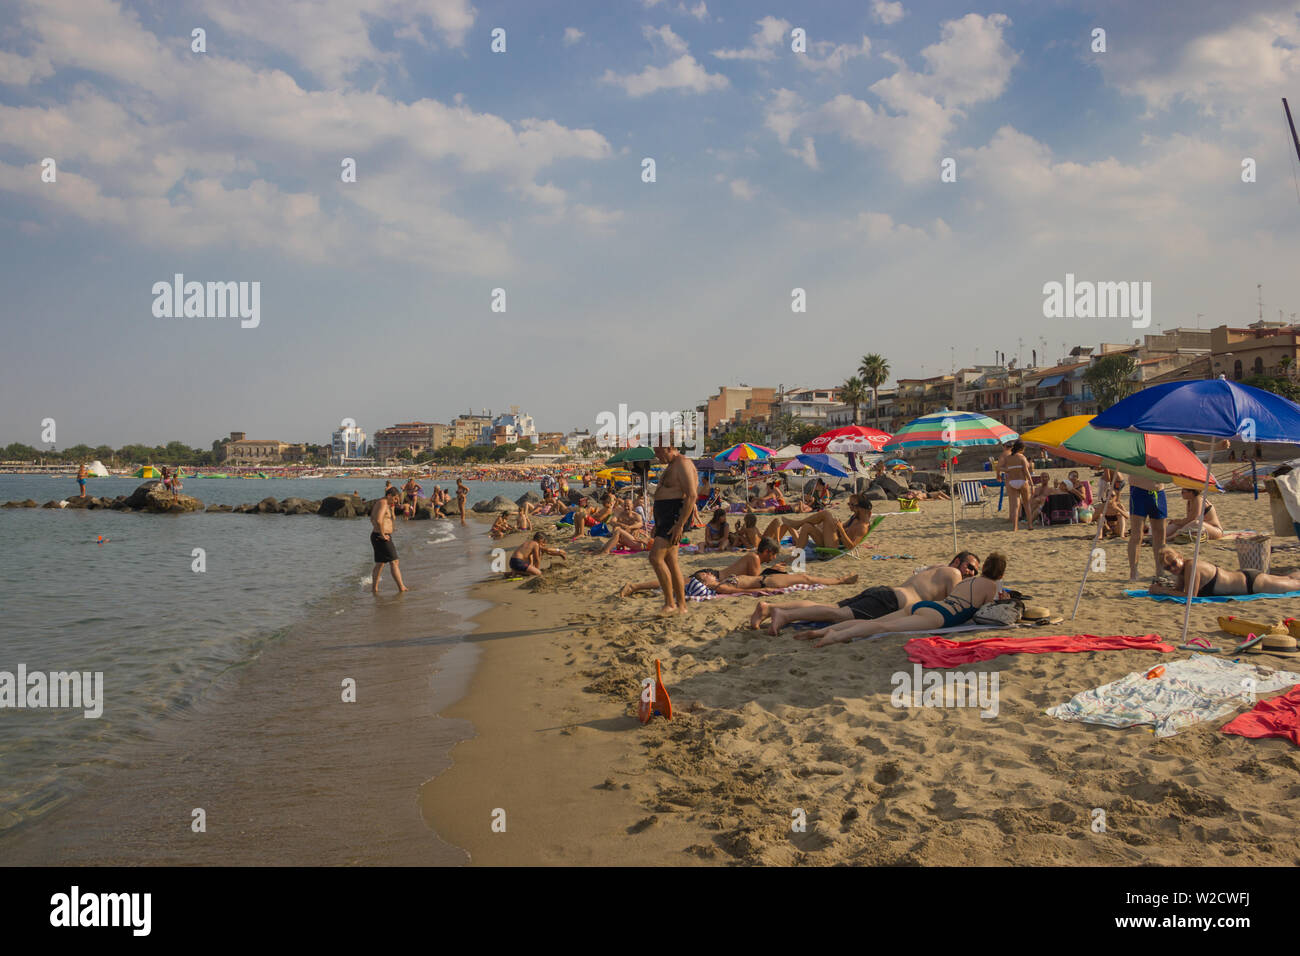 Giardini Naxos Sicily Italy 2019 close view of the people enjoying the Summer vacation at beach, long view of the beach along the town Stock Photo